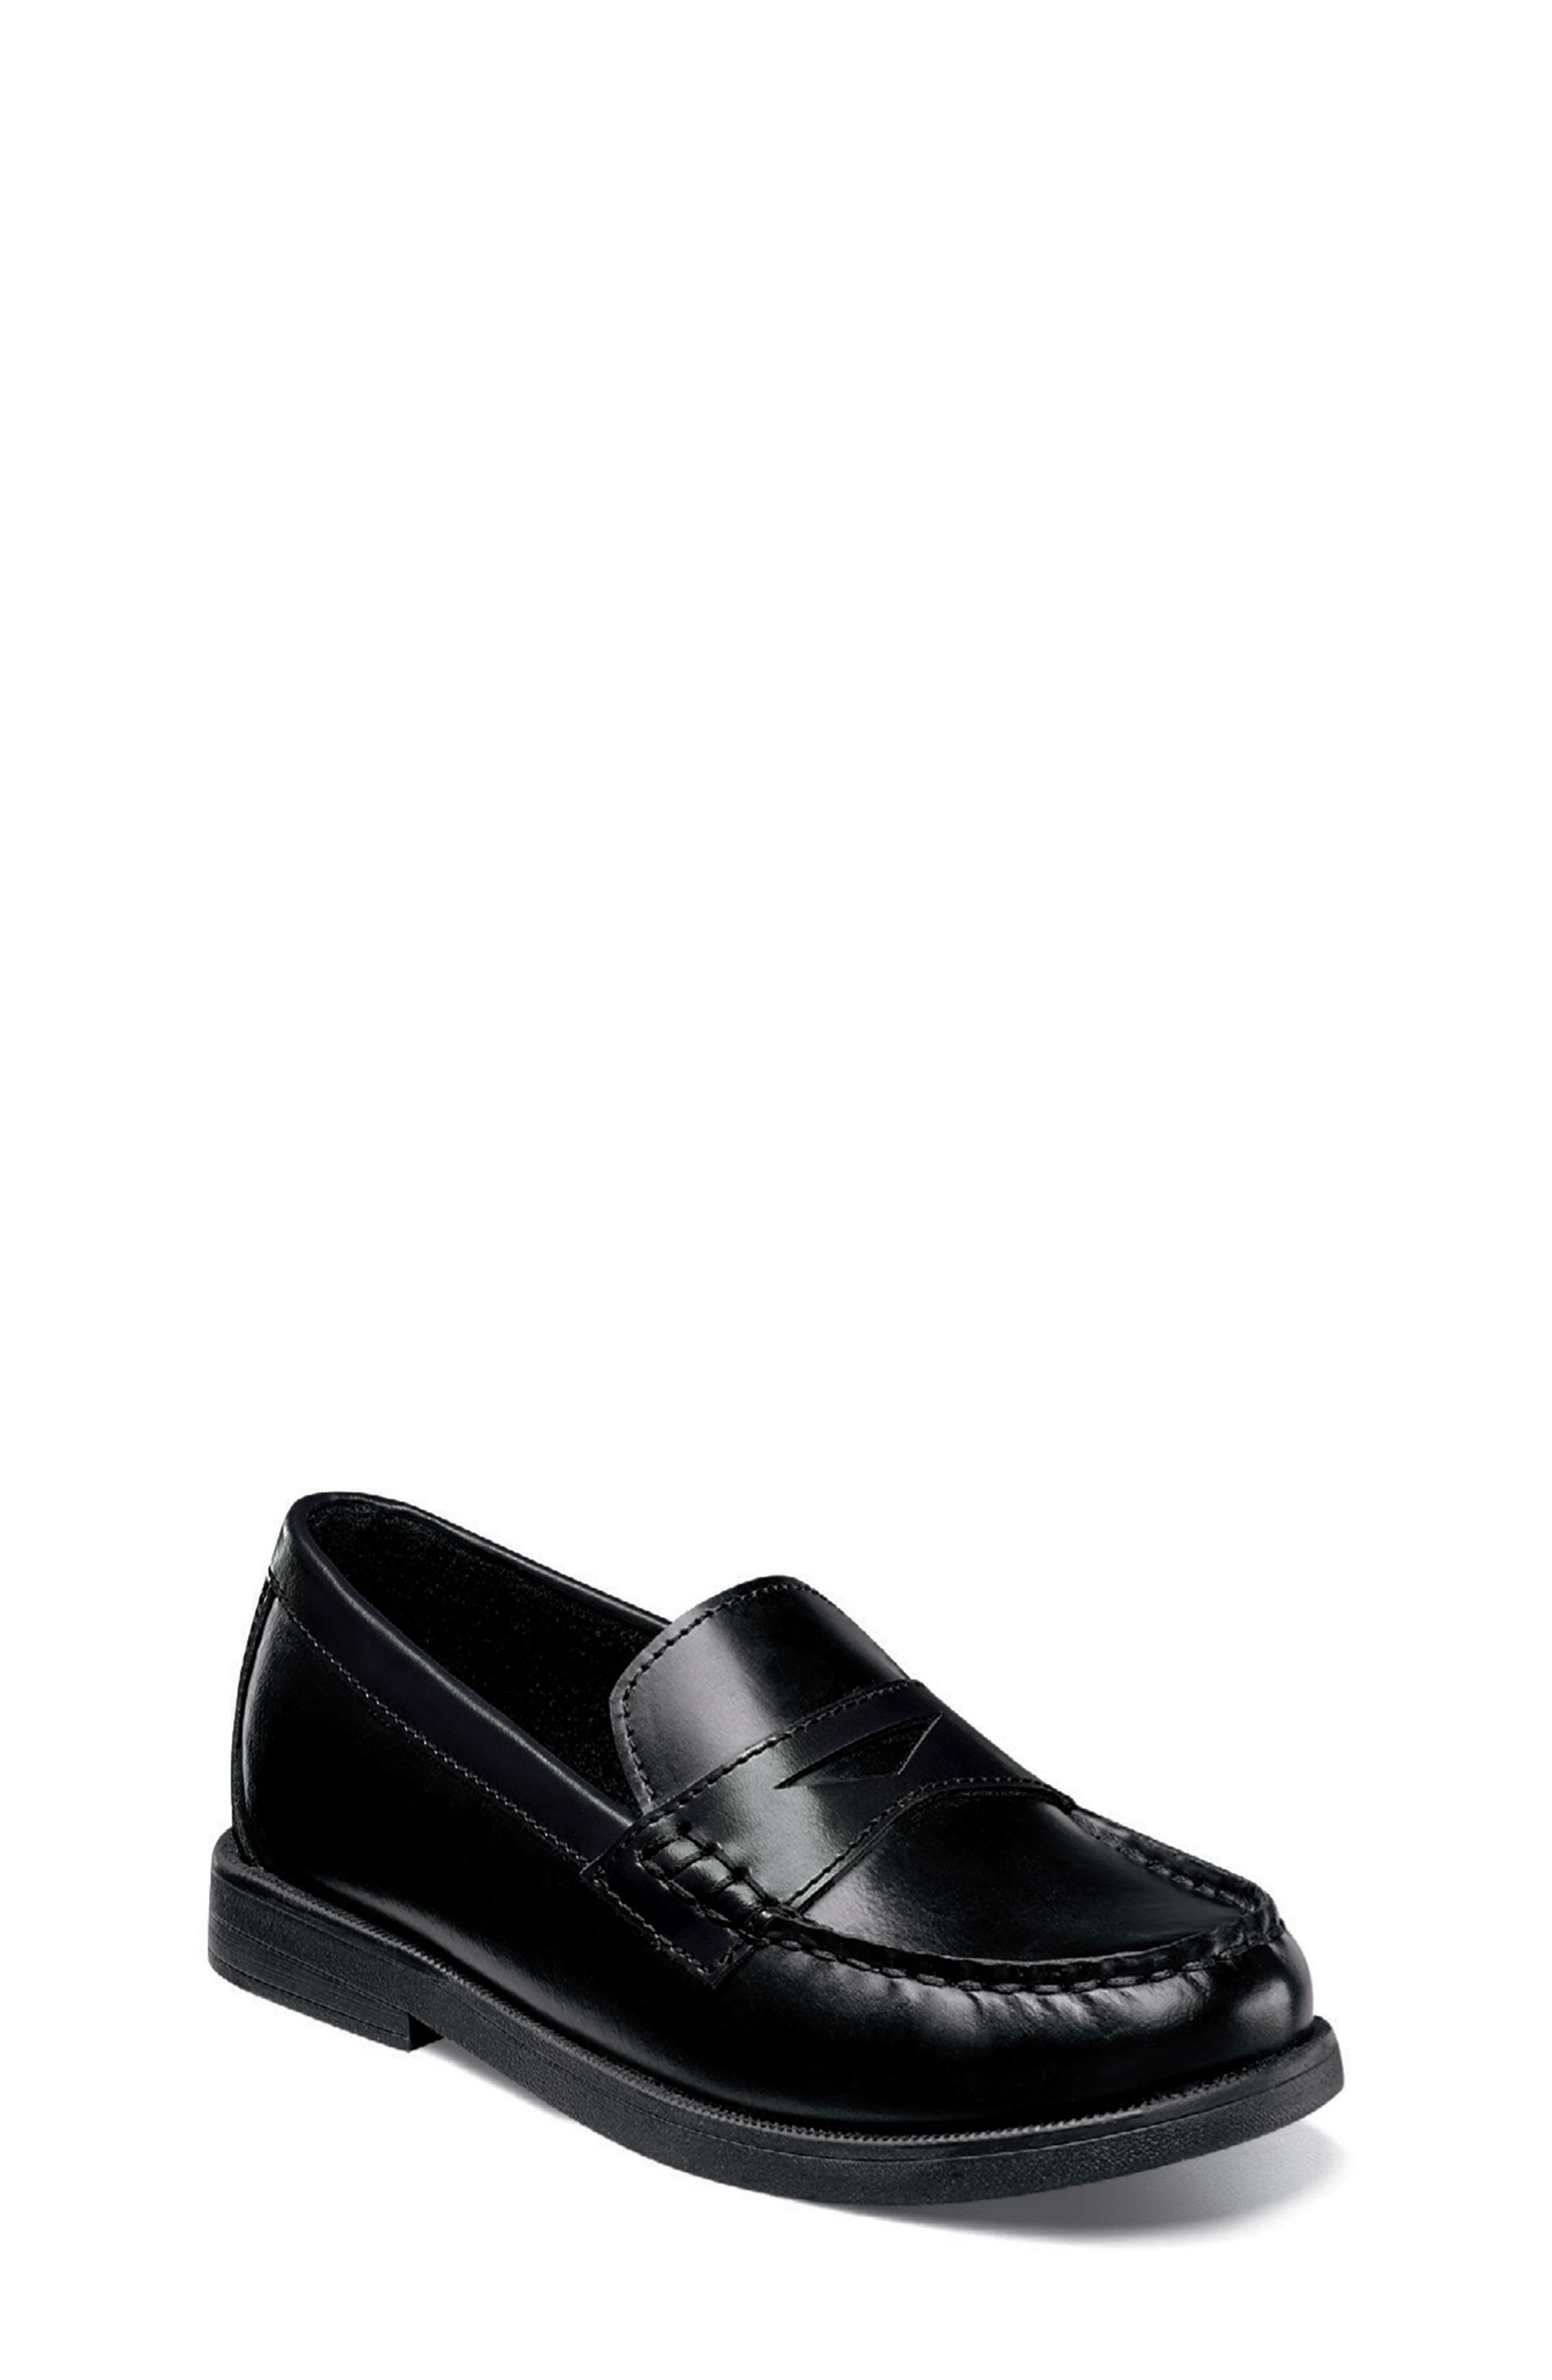 penny loafers for kids